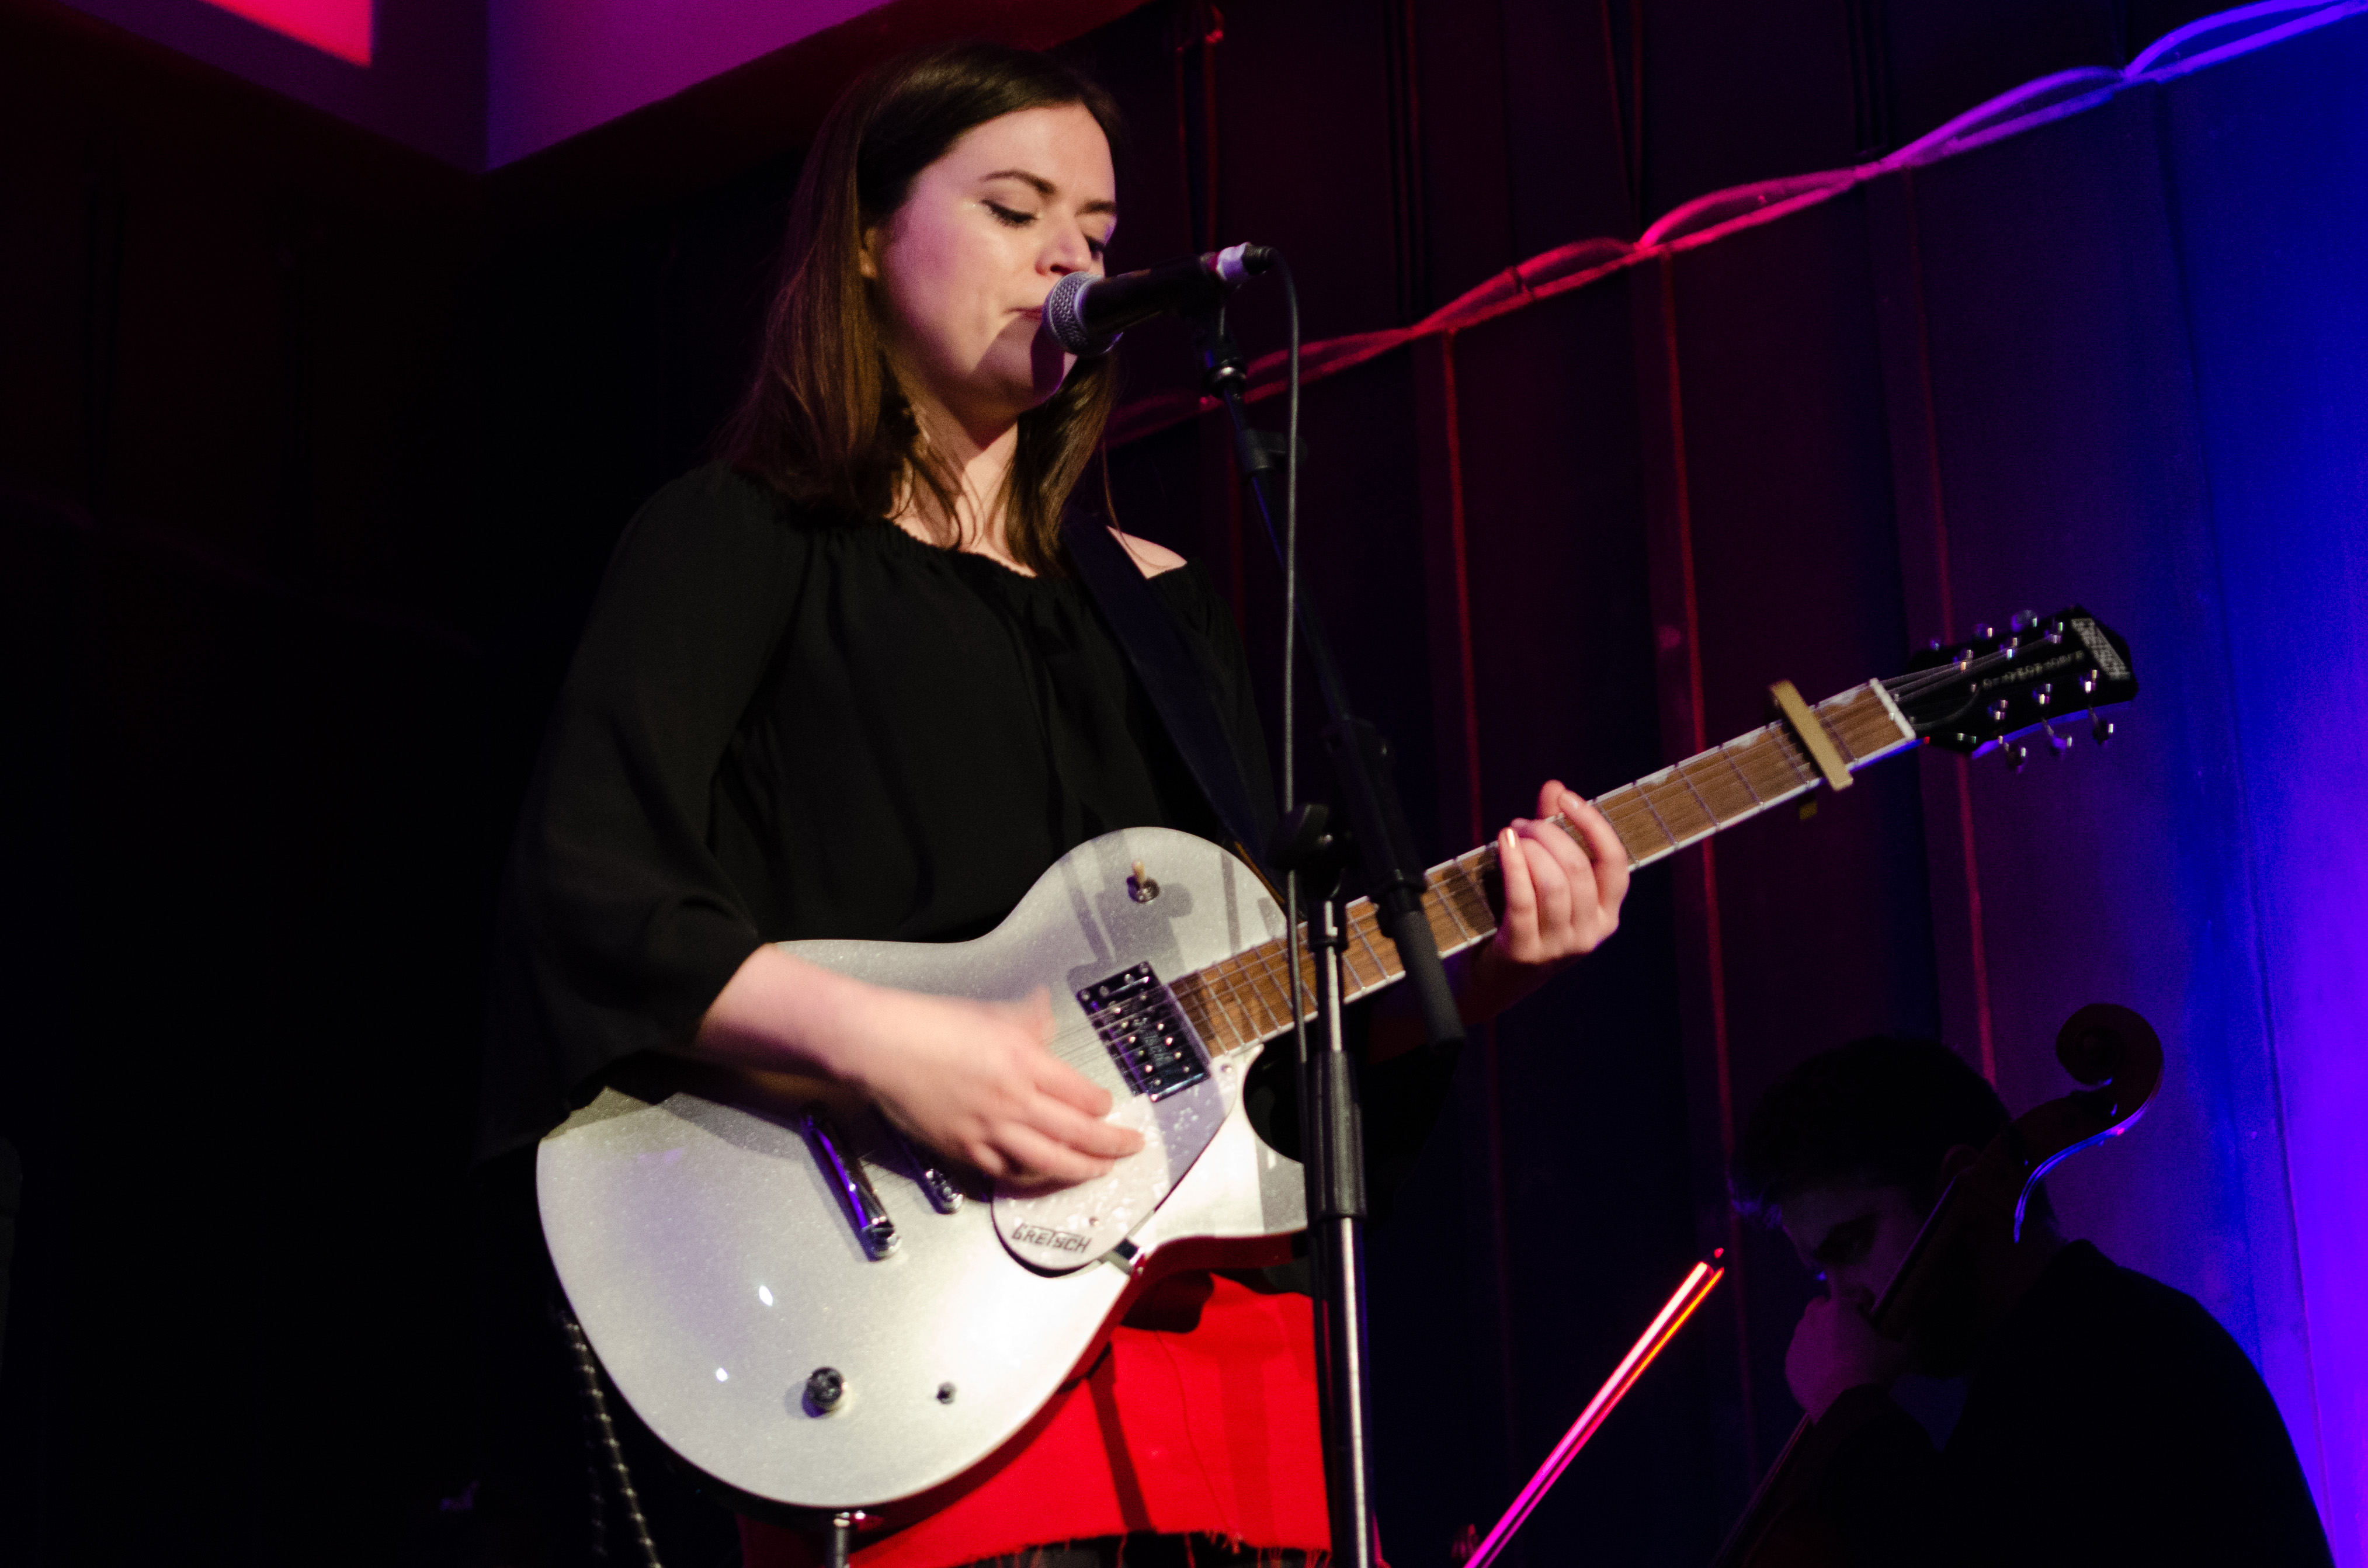 Siobhan Wilson on stage at The Mackintosh Church for Celtic Connections on 3 February 2018